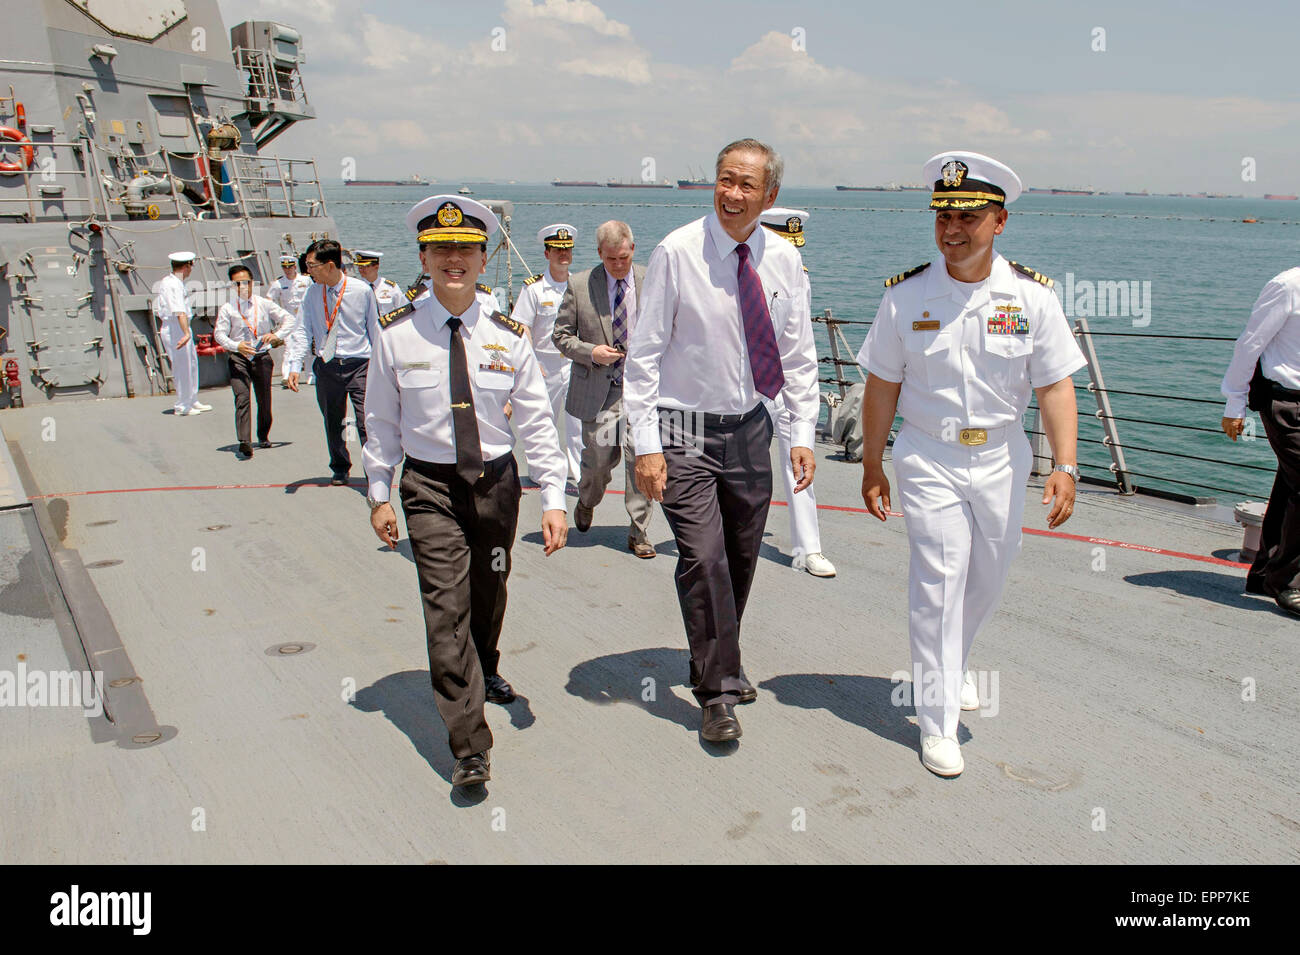 U.S. Navy Cmdr. Joseph Torres, right, escorts Singapore Minister of Defence Dr. Ng Eng Hen, center, during a tour of the Arleigh Burke-class guided missile destroyer USS Mustin May 19, 2015 in Singapore. The Mustin is participating in Singapore's International Maritime Defence Exhibition along with other U.S. Navy vessels. Stock Photo